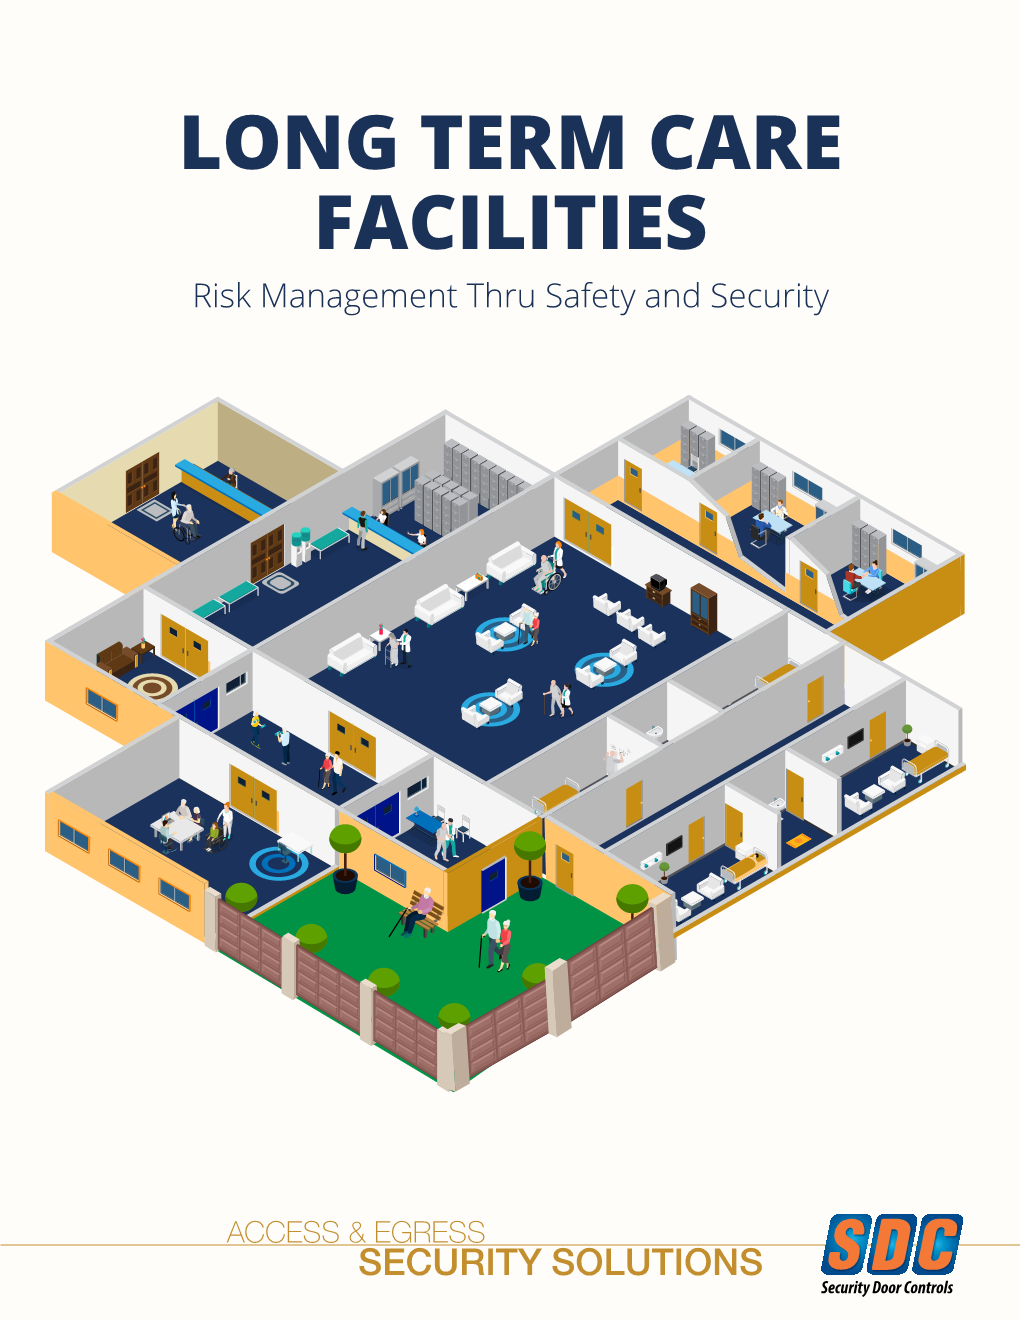 LONG TERM CARE FACILITIES Risk Management Thru Safety and Security